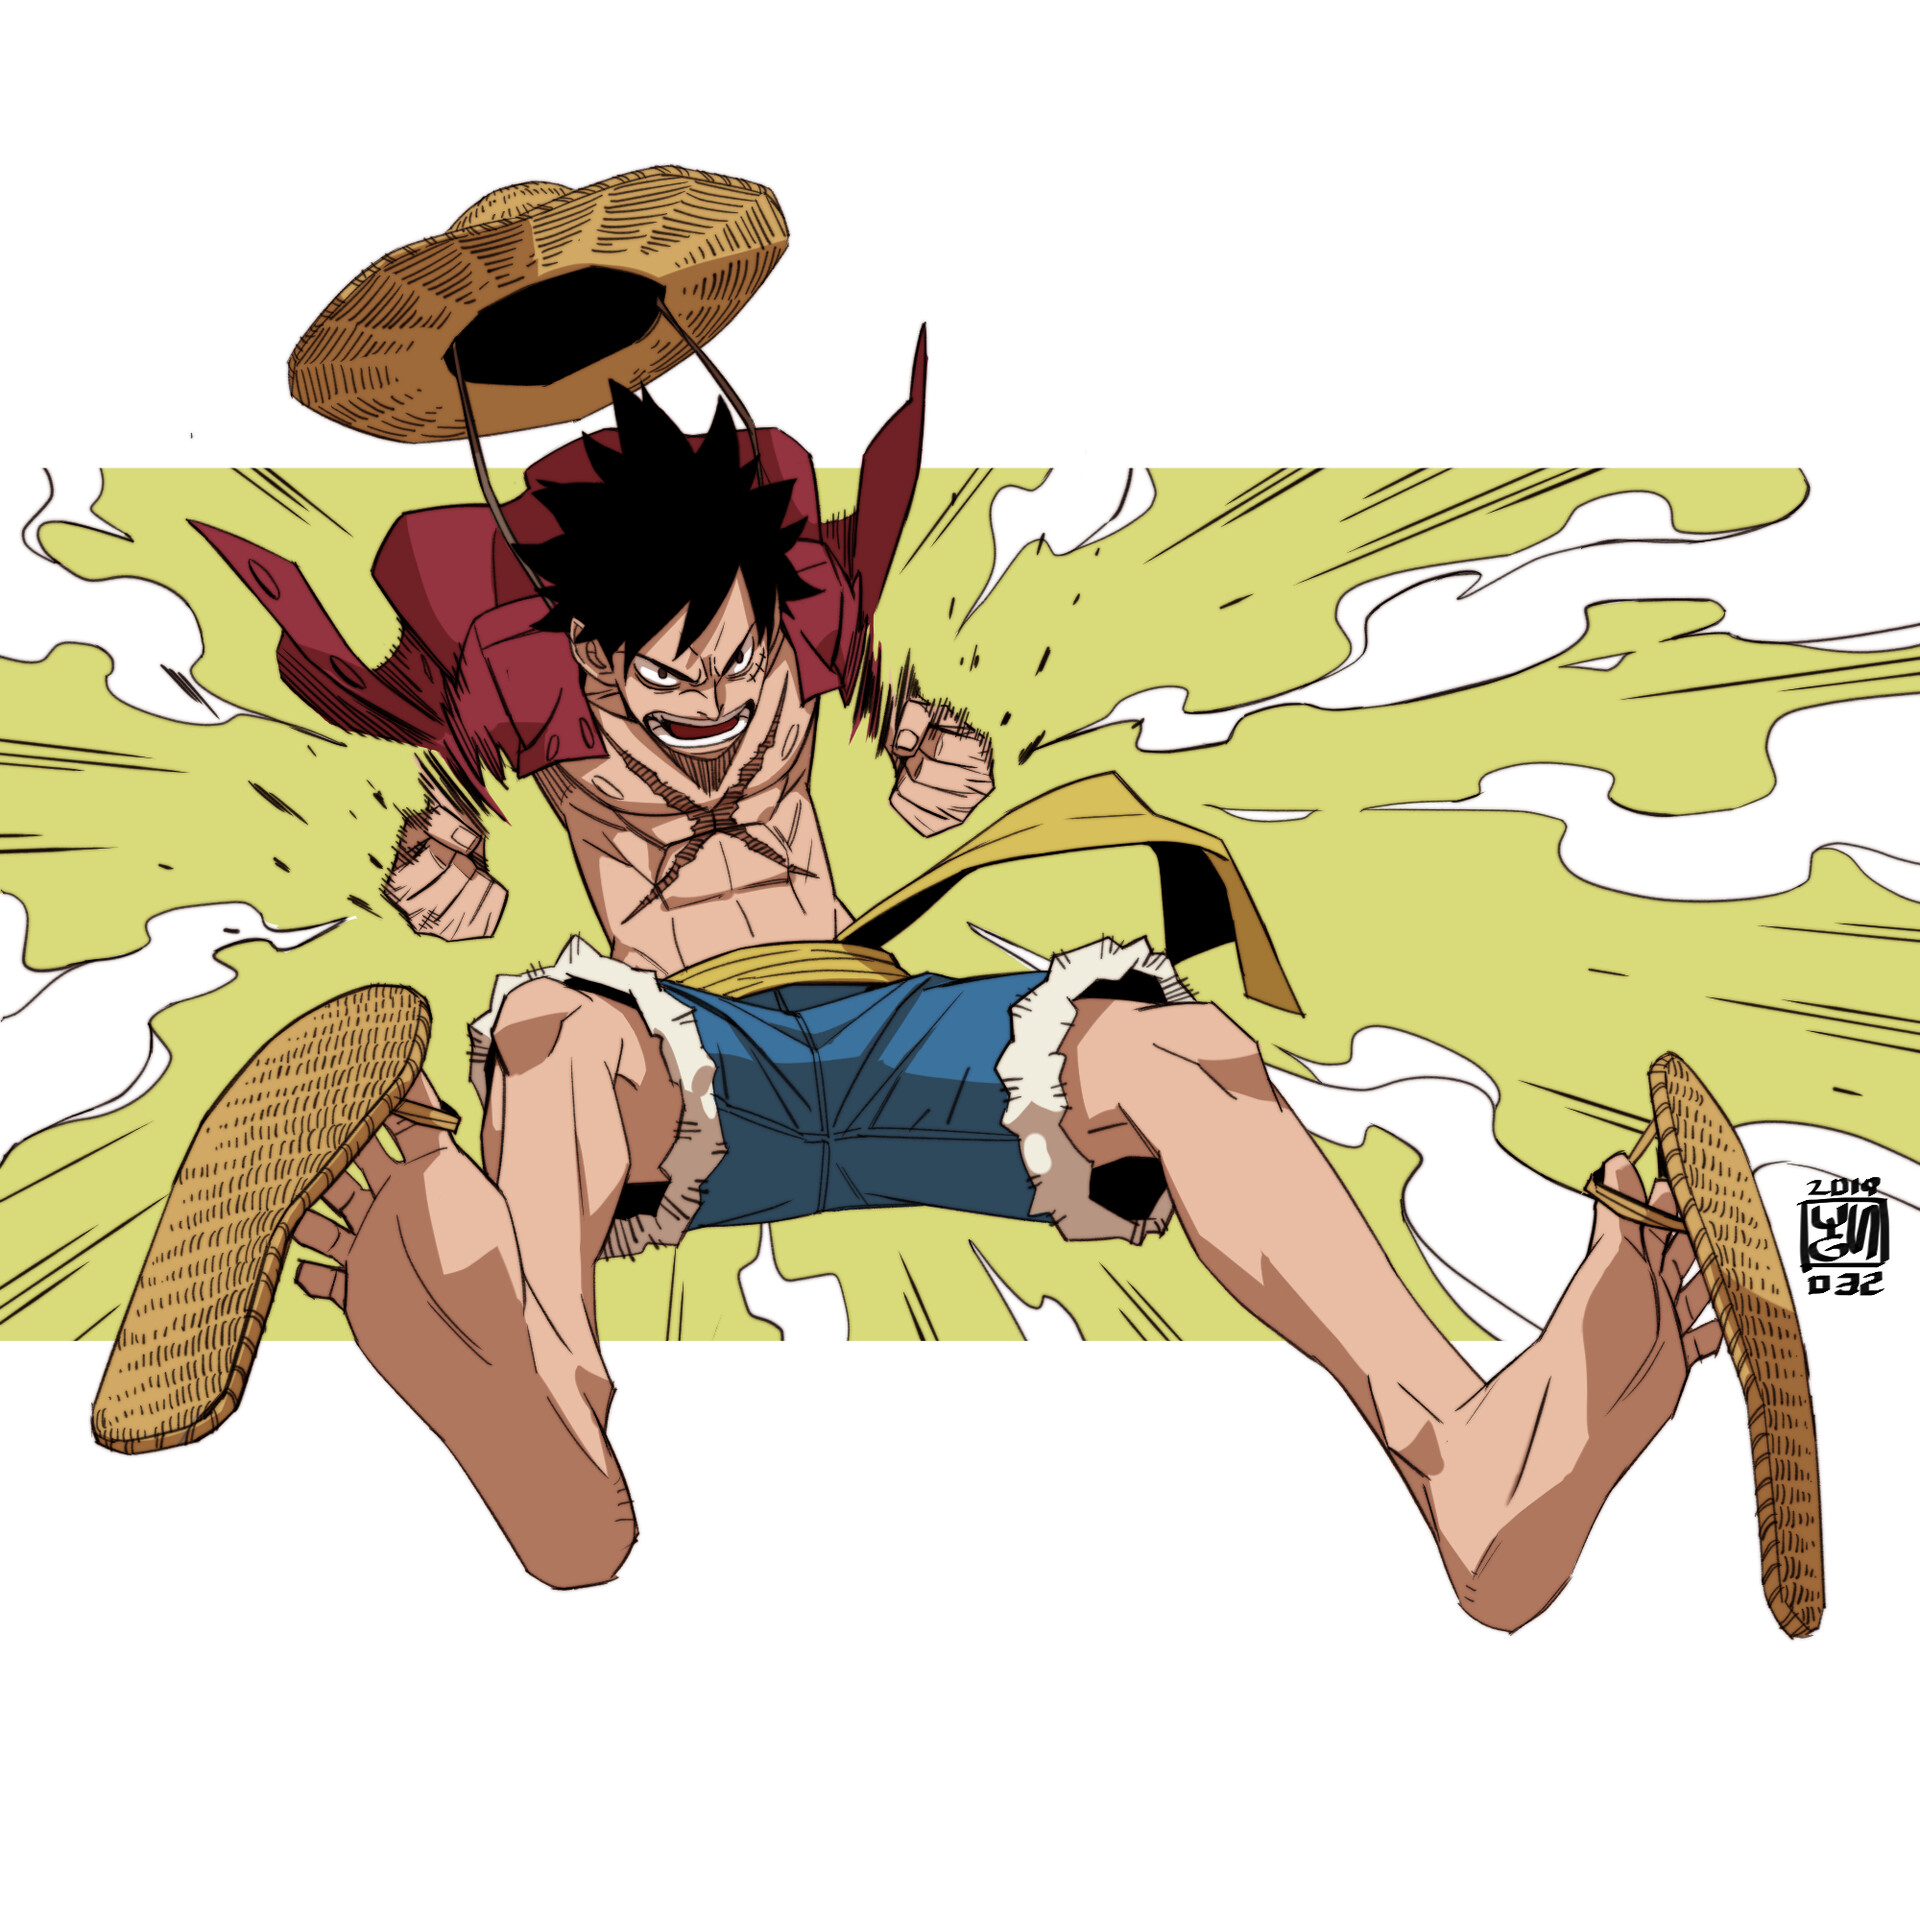 Monkey D Dragon Saves Luffy against Smoker #onepiece #anime #luffy